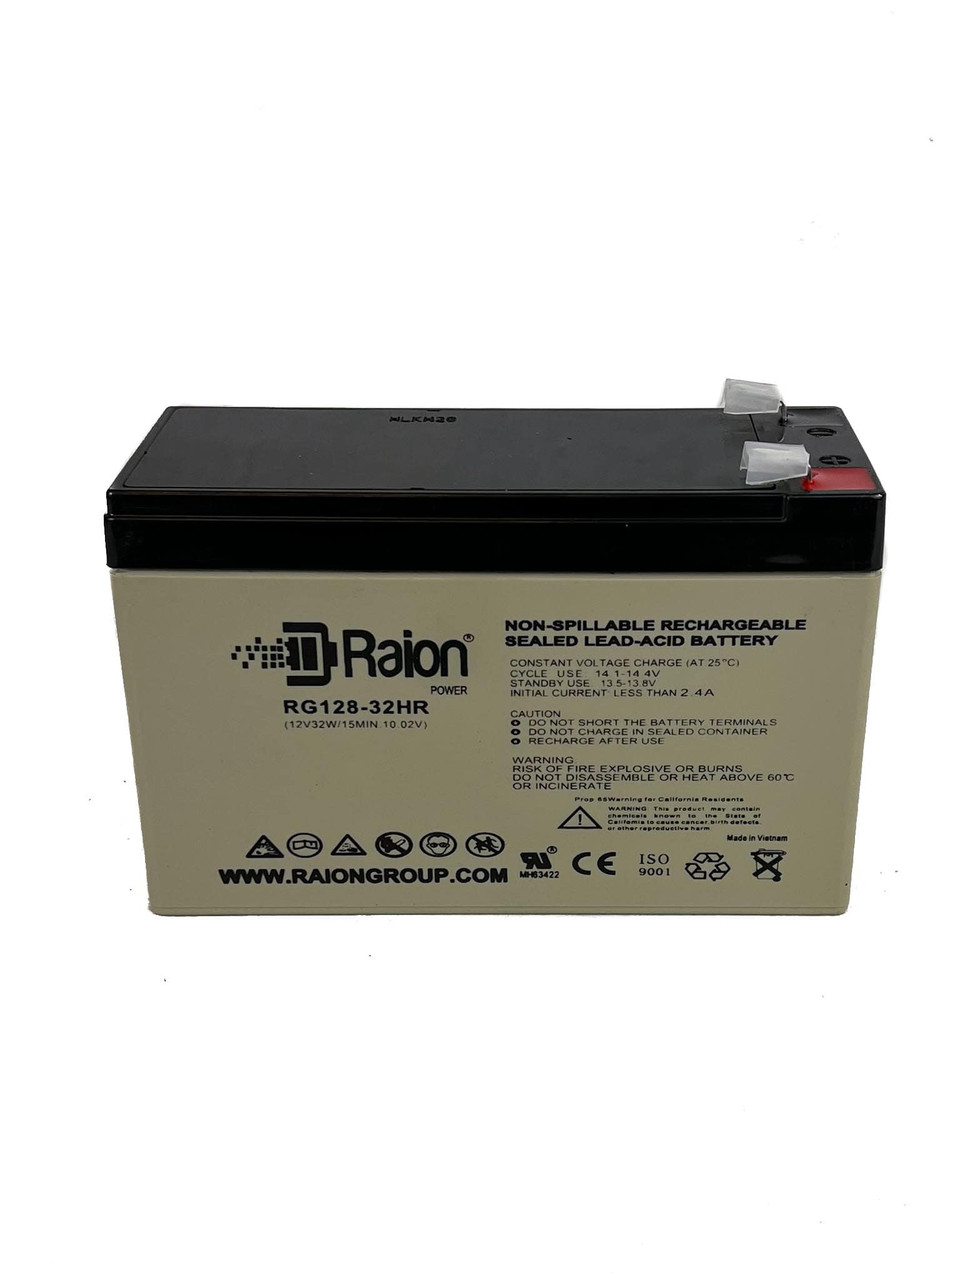 Raion Power RG128-32HR Replacement High Rate Battery Cartridge for APC BACKUPS BK400B